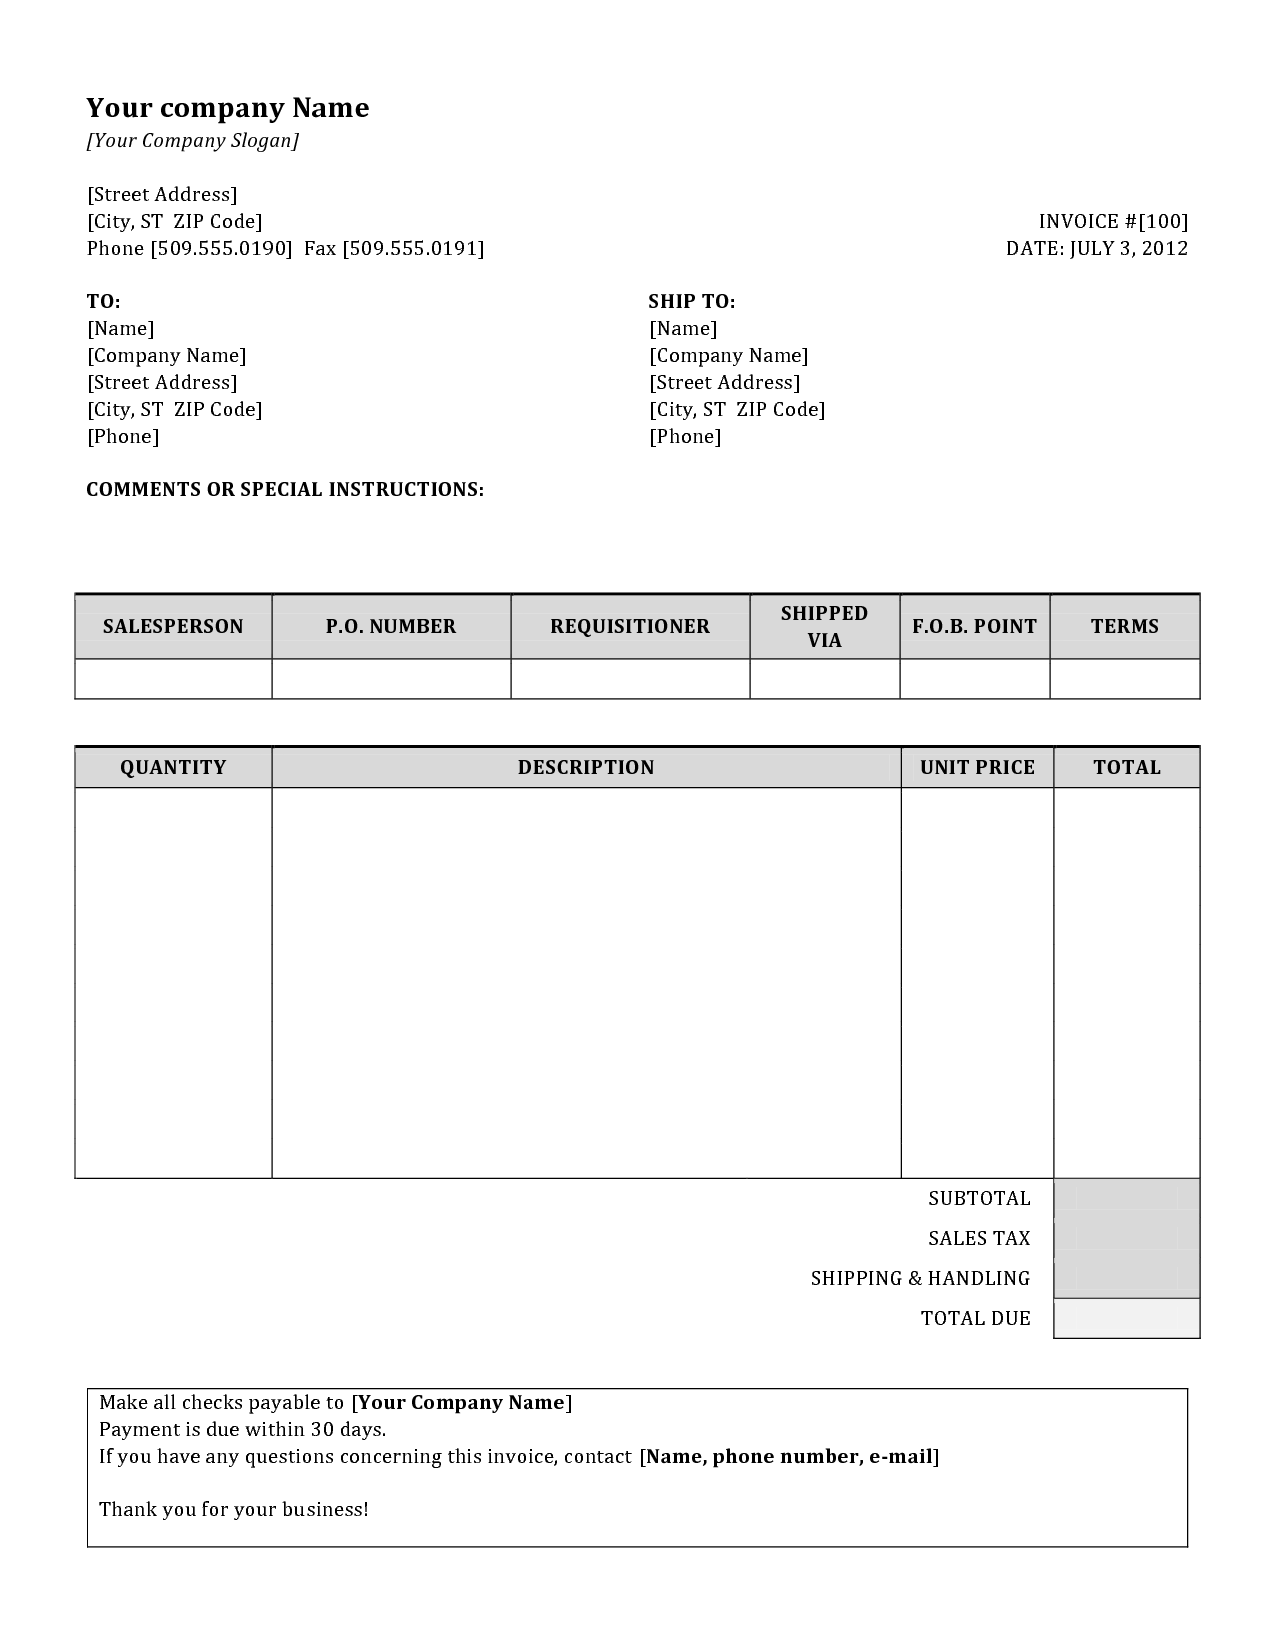 Doc.#513666: Invoice Template Samples – Free Invoice Template for 